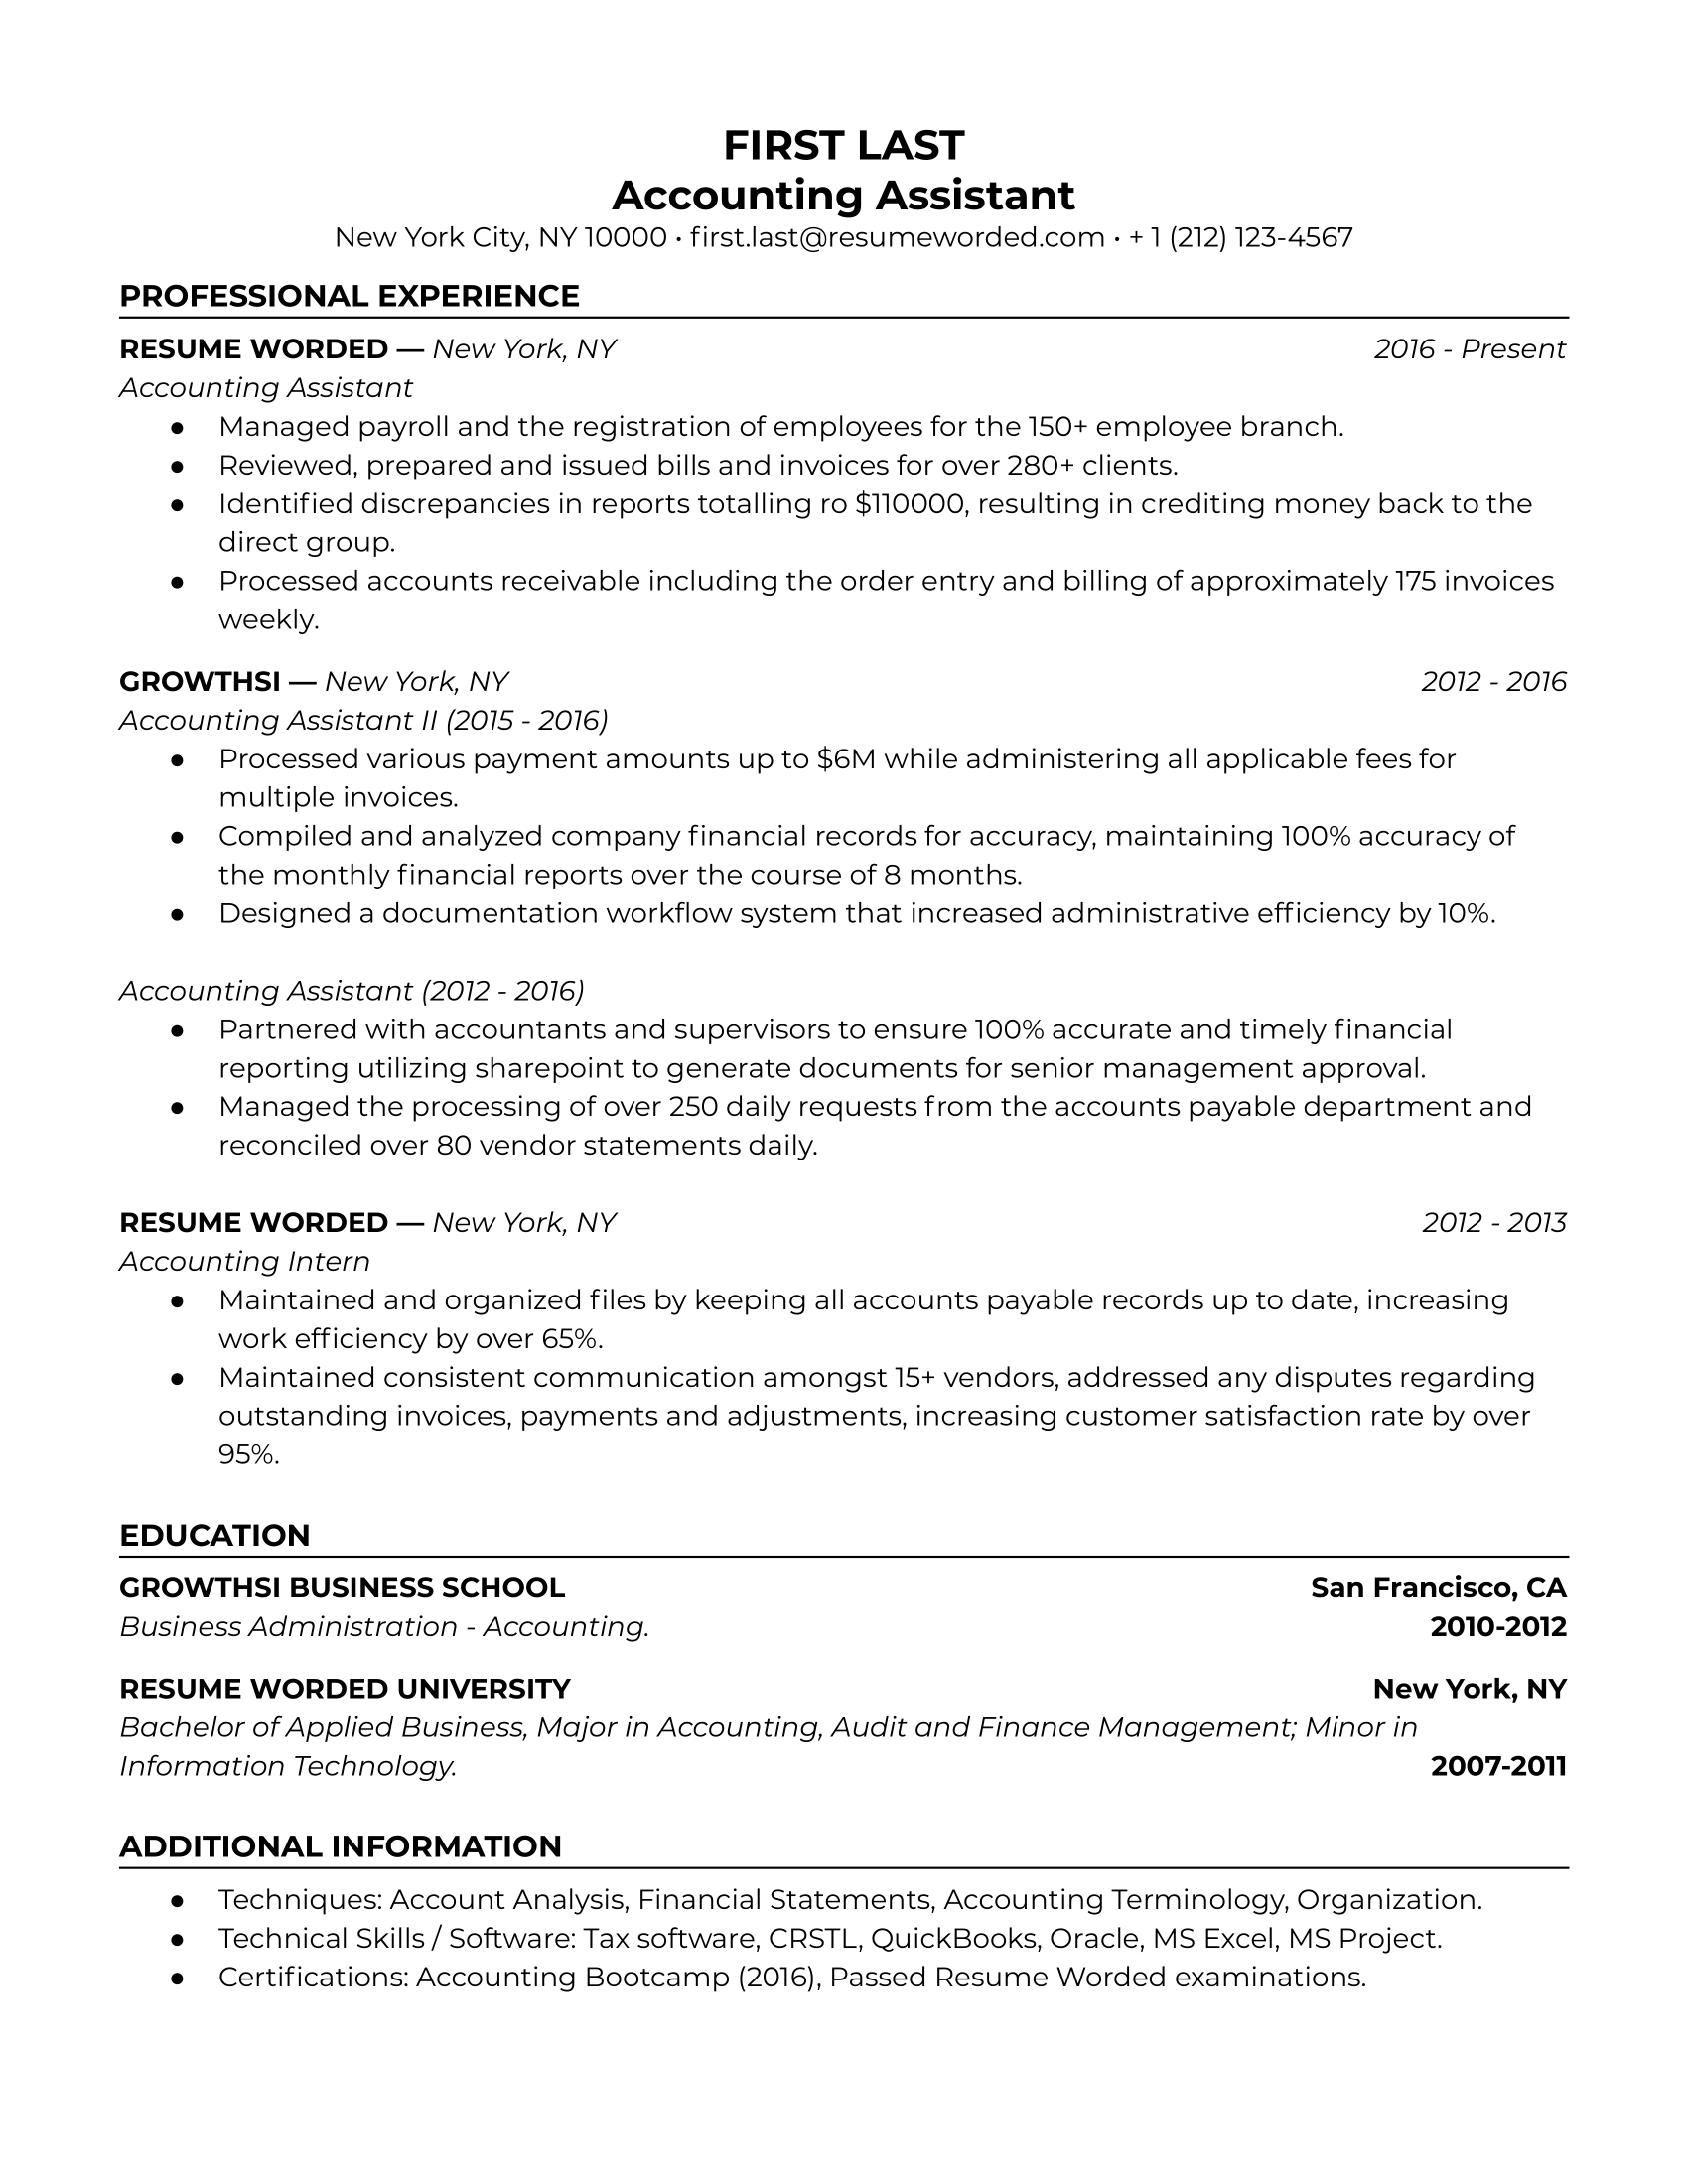 Accounting assistant resume focused on specific position with educational history